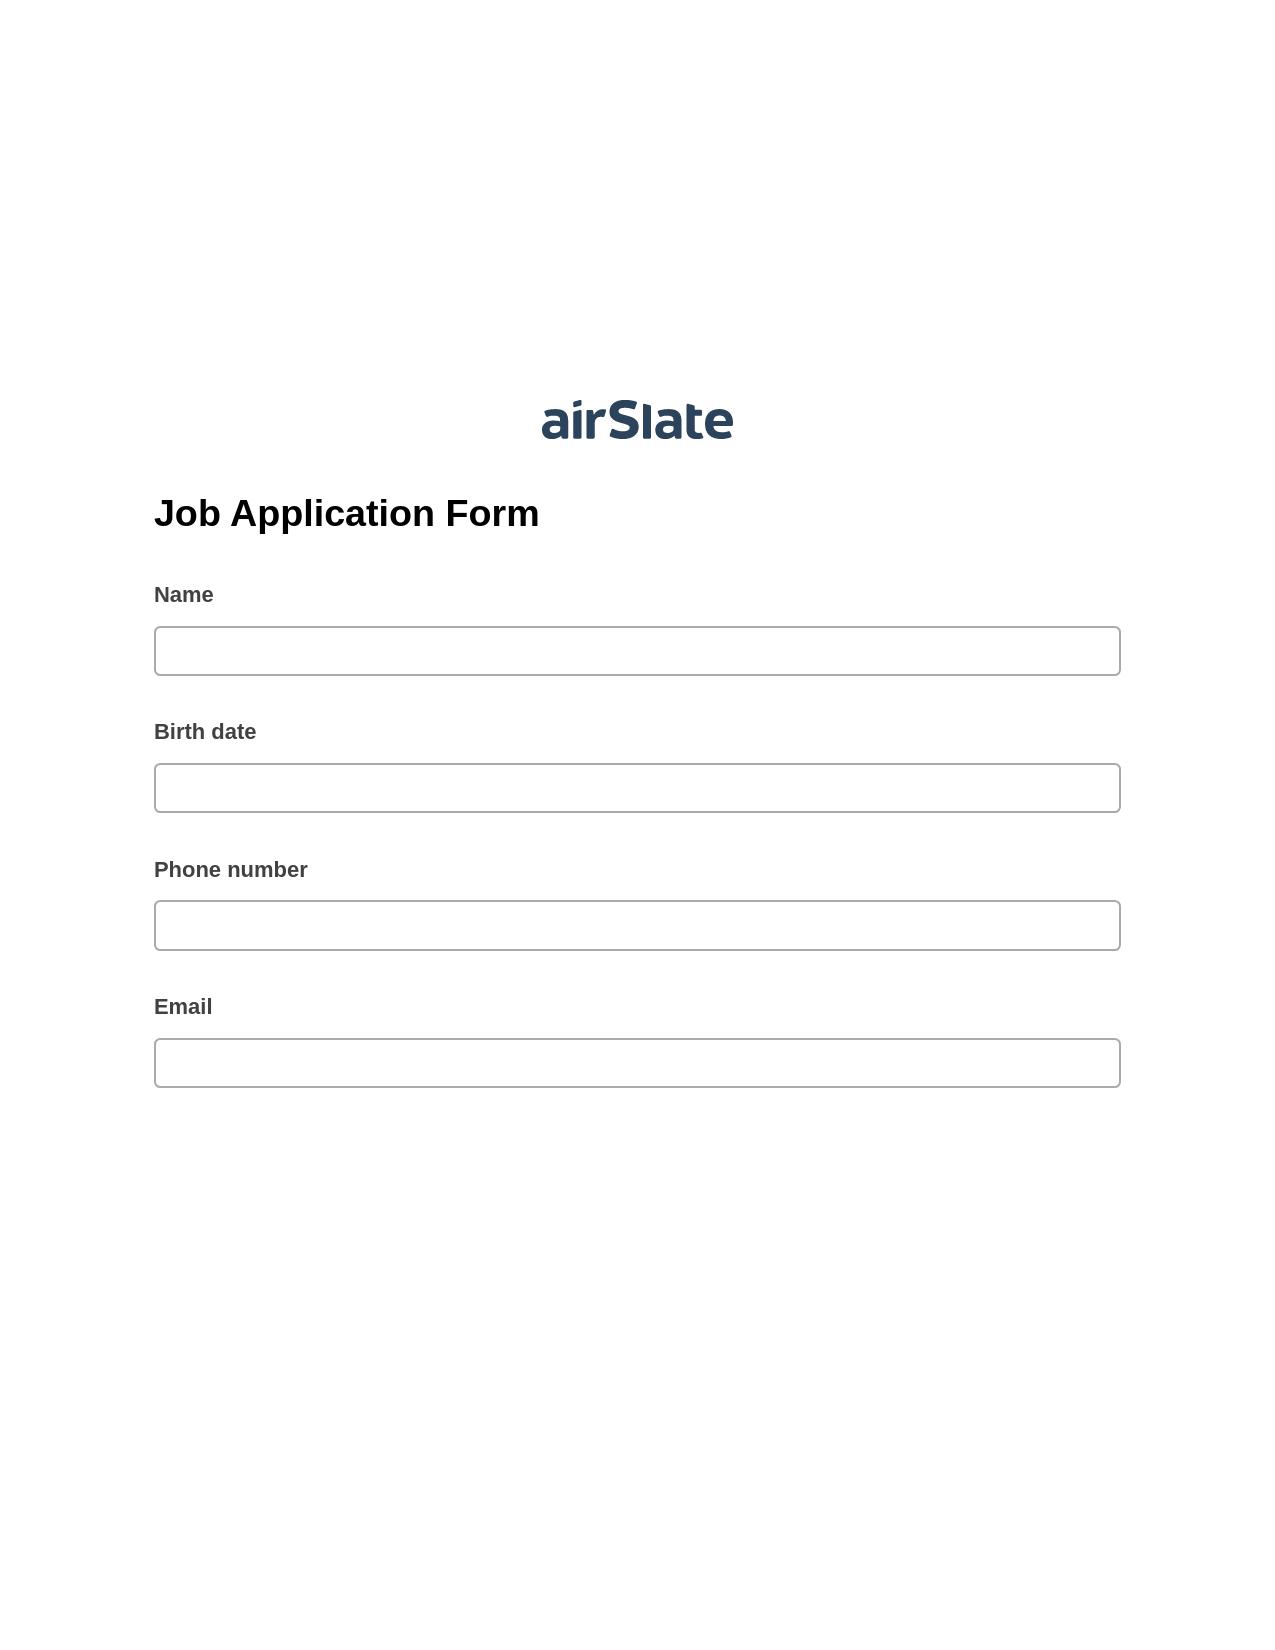 Multirole Job Application Form Pre-fill from CSV File Bot, Document Hide Bot, Export to Salesforce Bot